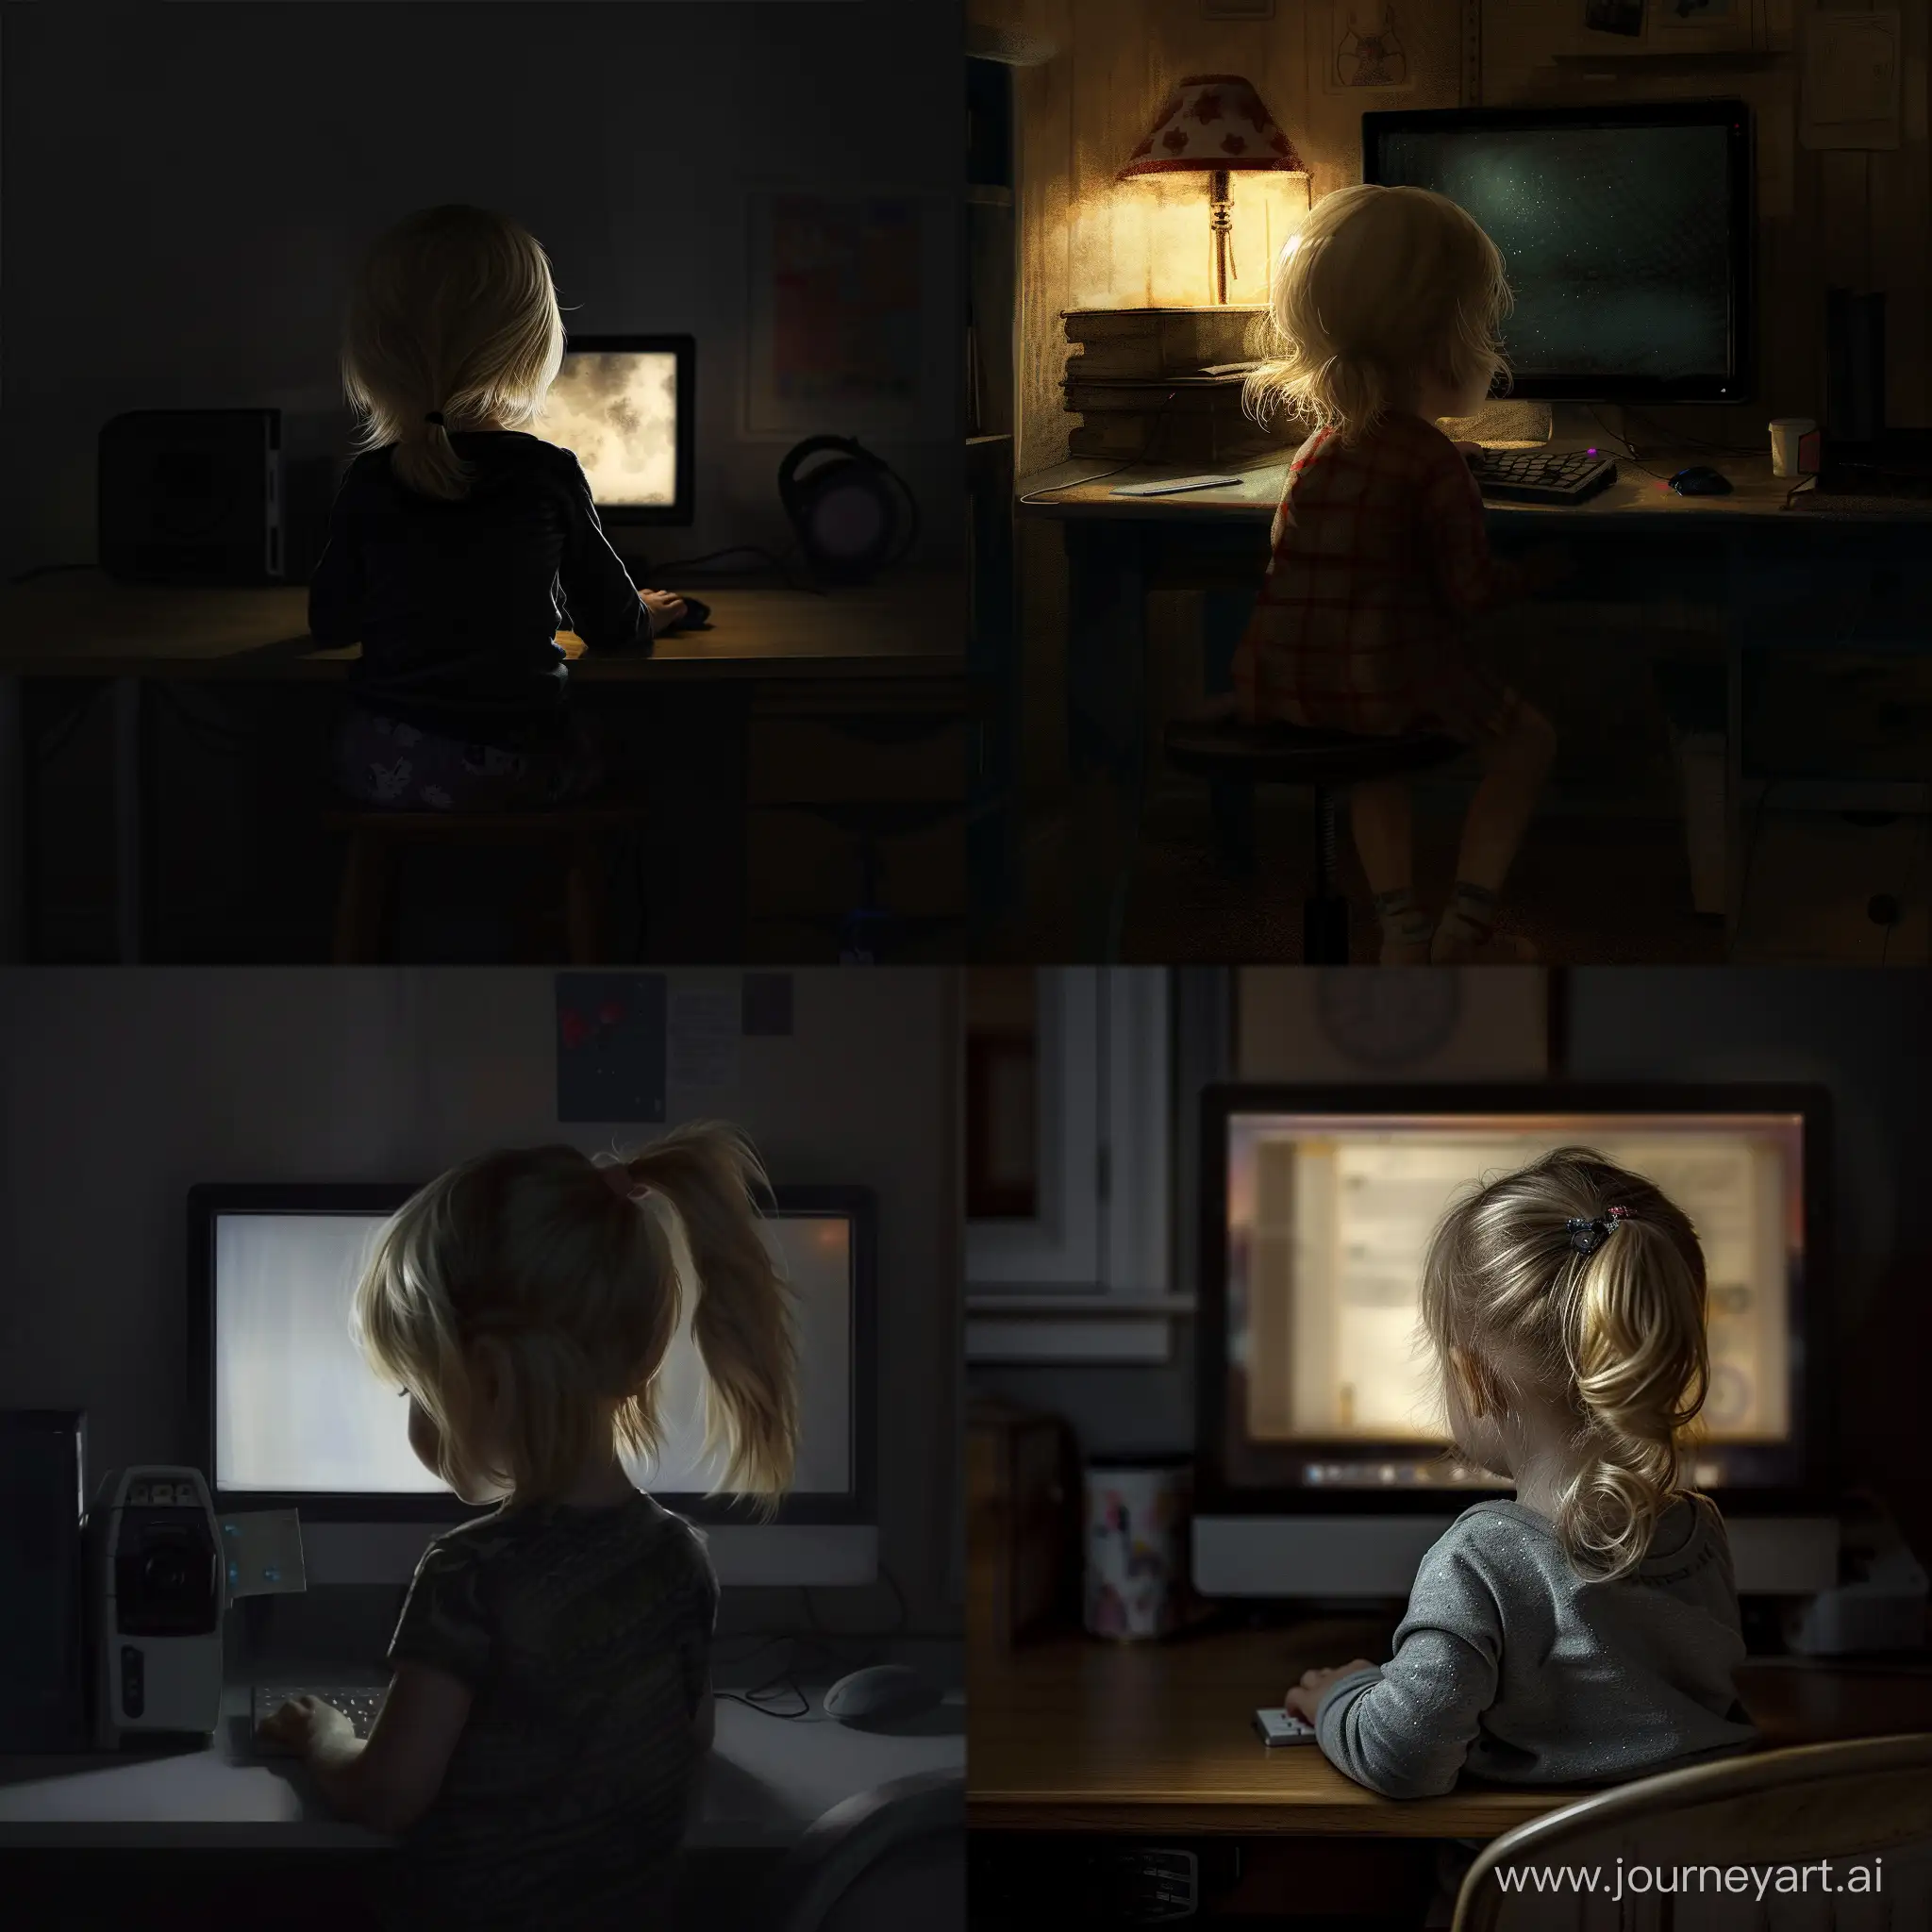 a realistic image of a little blonde girl sitting with her back turned and looking at the computer on the desk, in a dark room lit only by the light from the computer screen ​